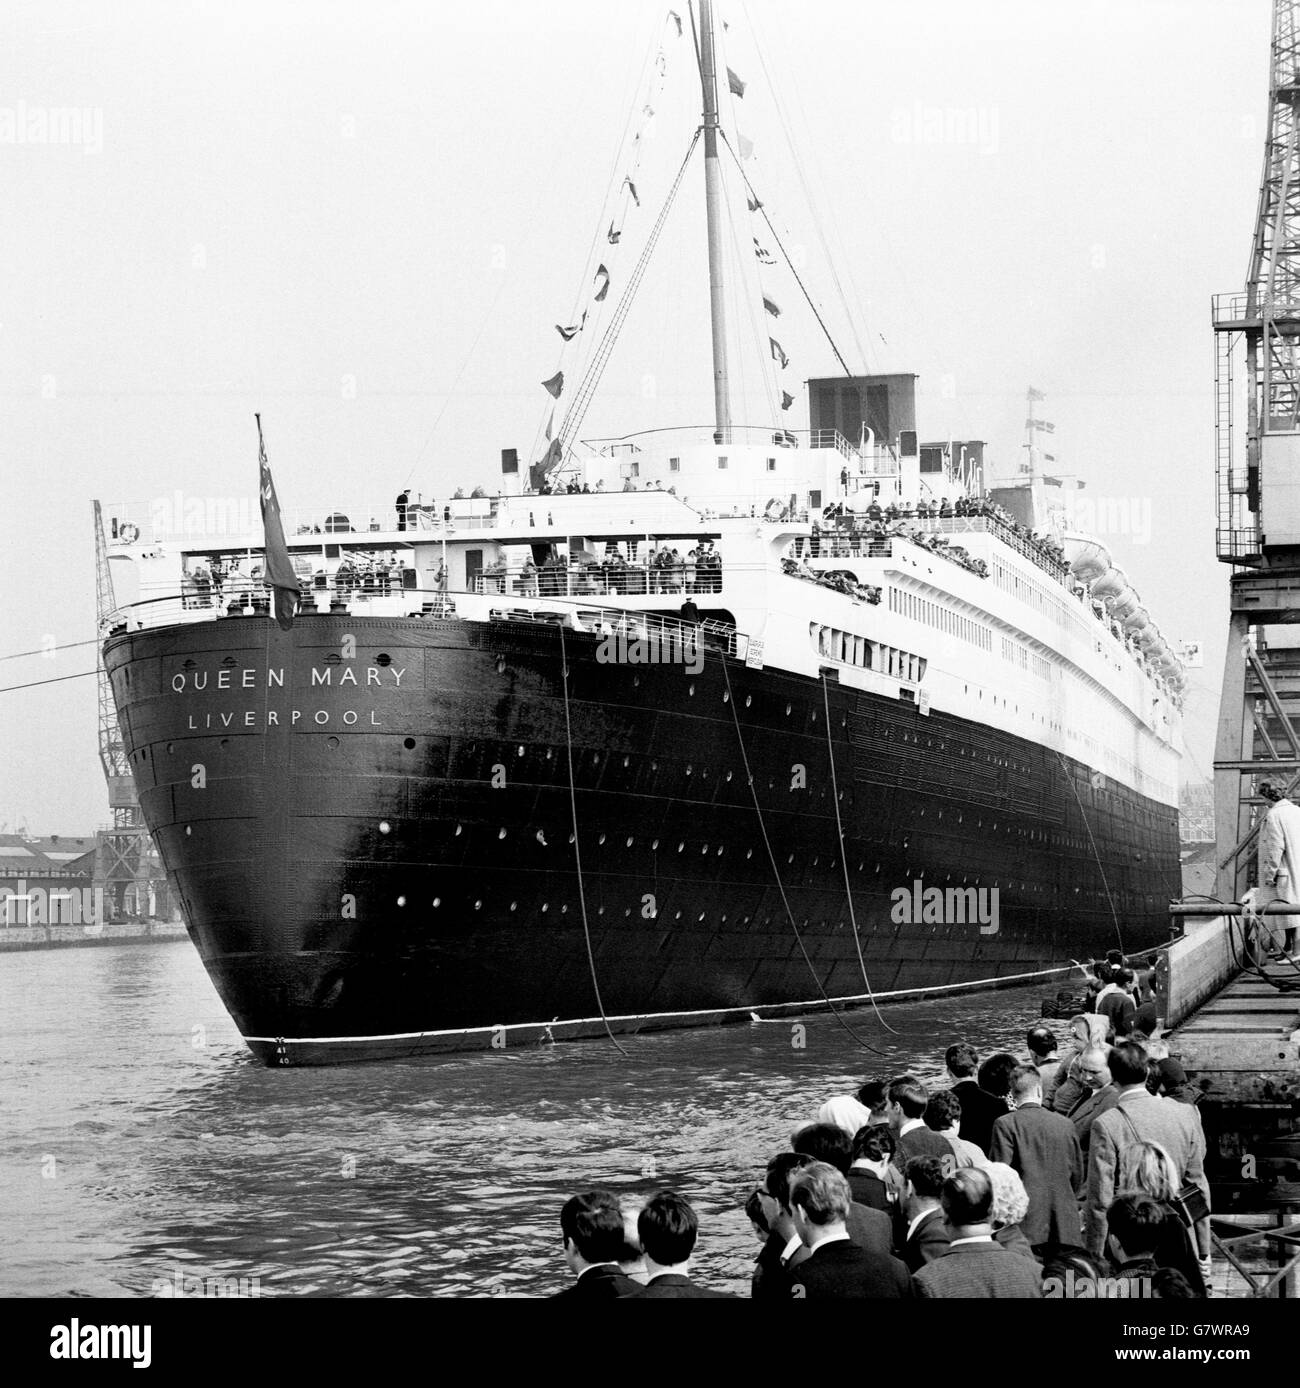 Transport - Queen Mary - Southampton Stock Photo